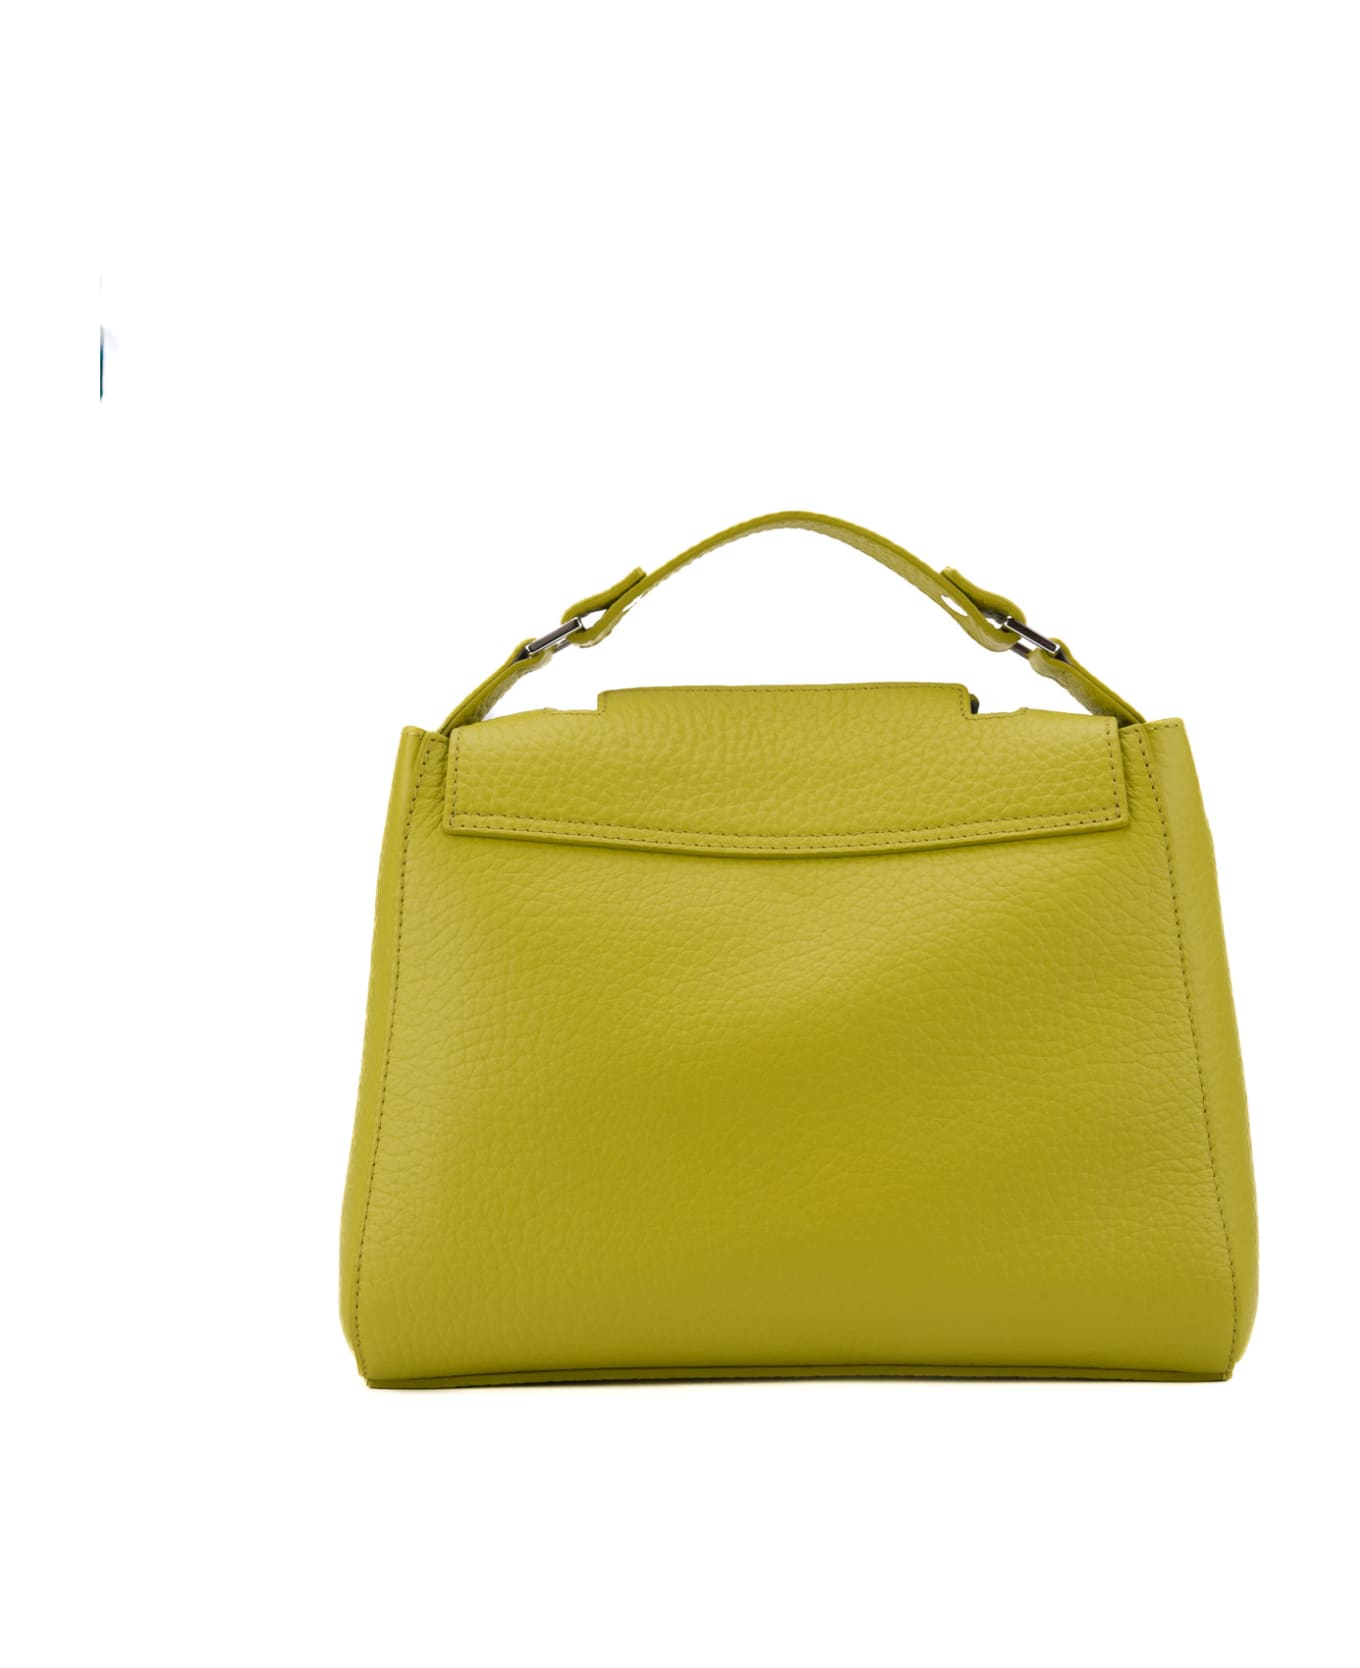 Orciani Small Sveva Soft Bag In Textured Leather - Giallo